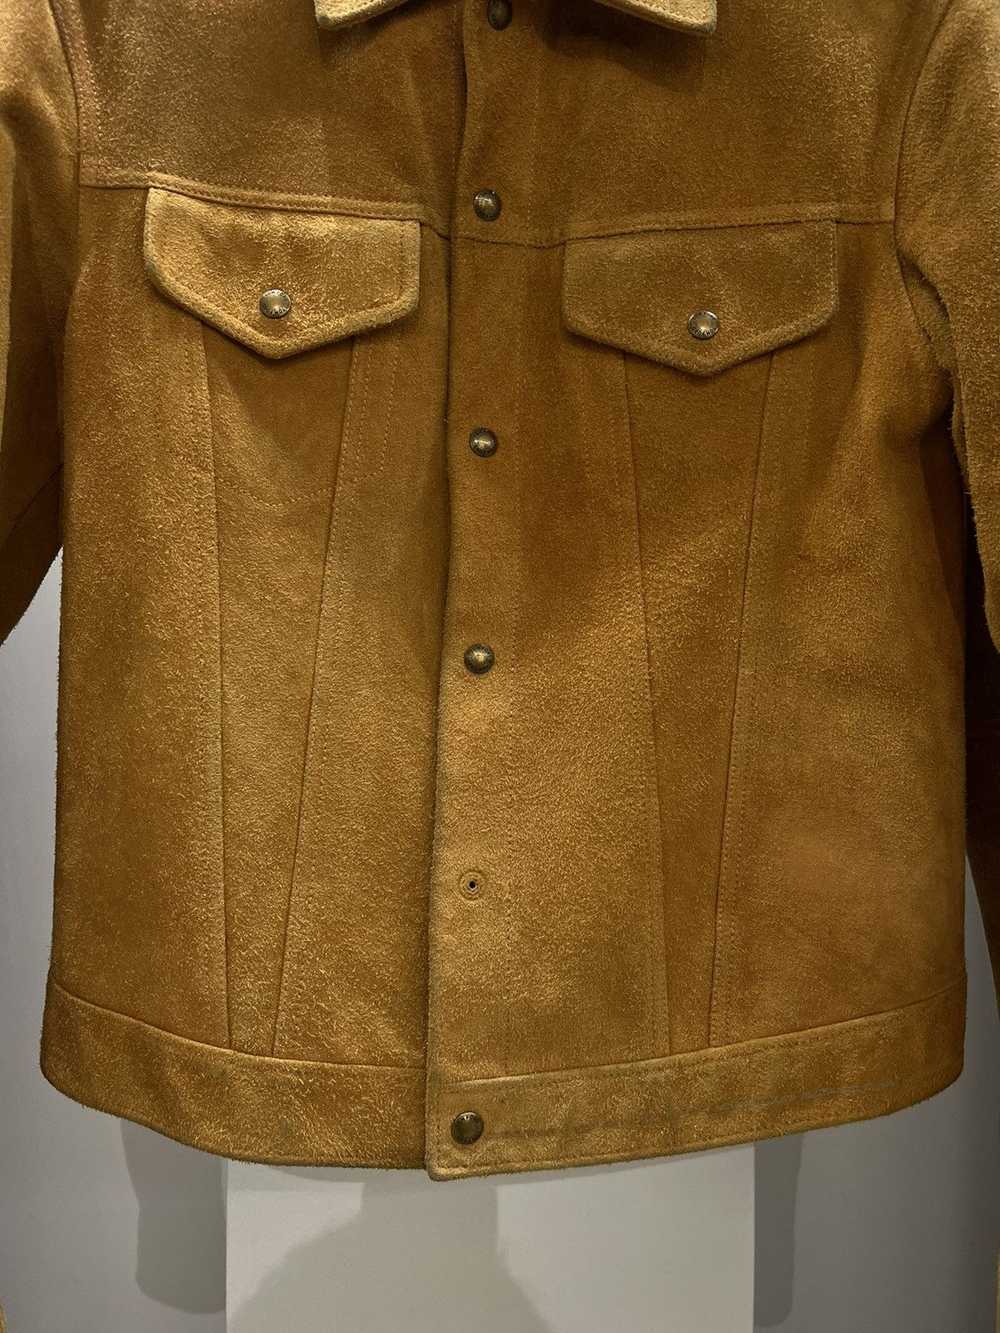 Tom Ford Tom Ford Suede Leather Jacket - image 3